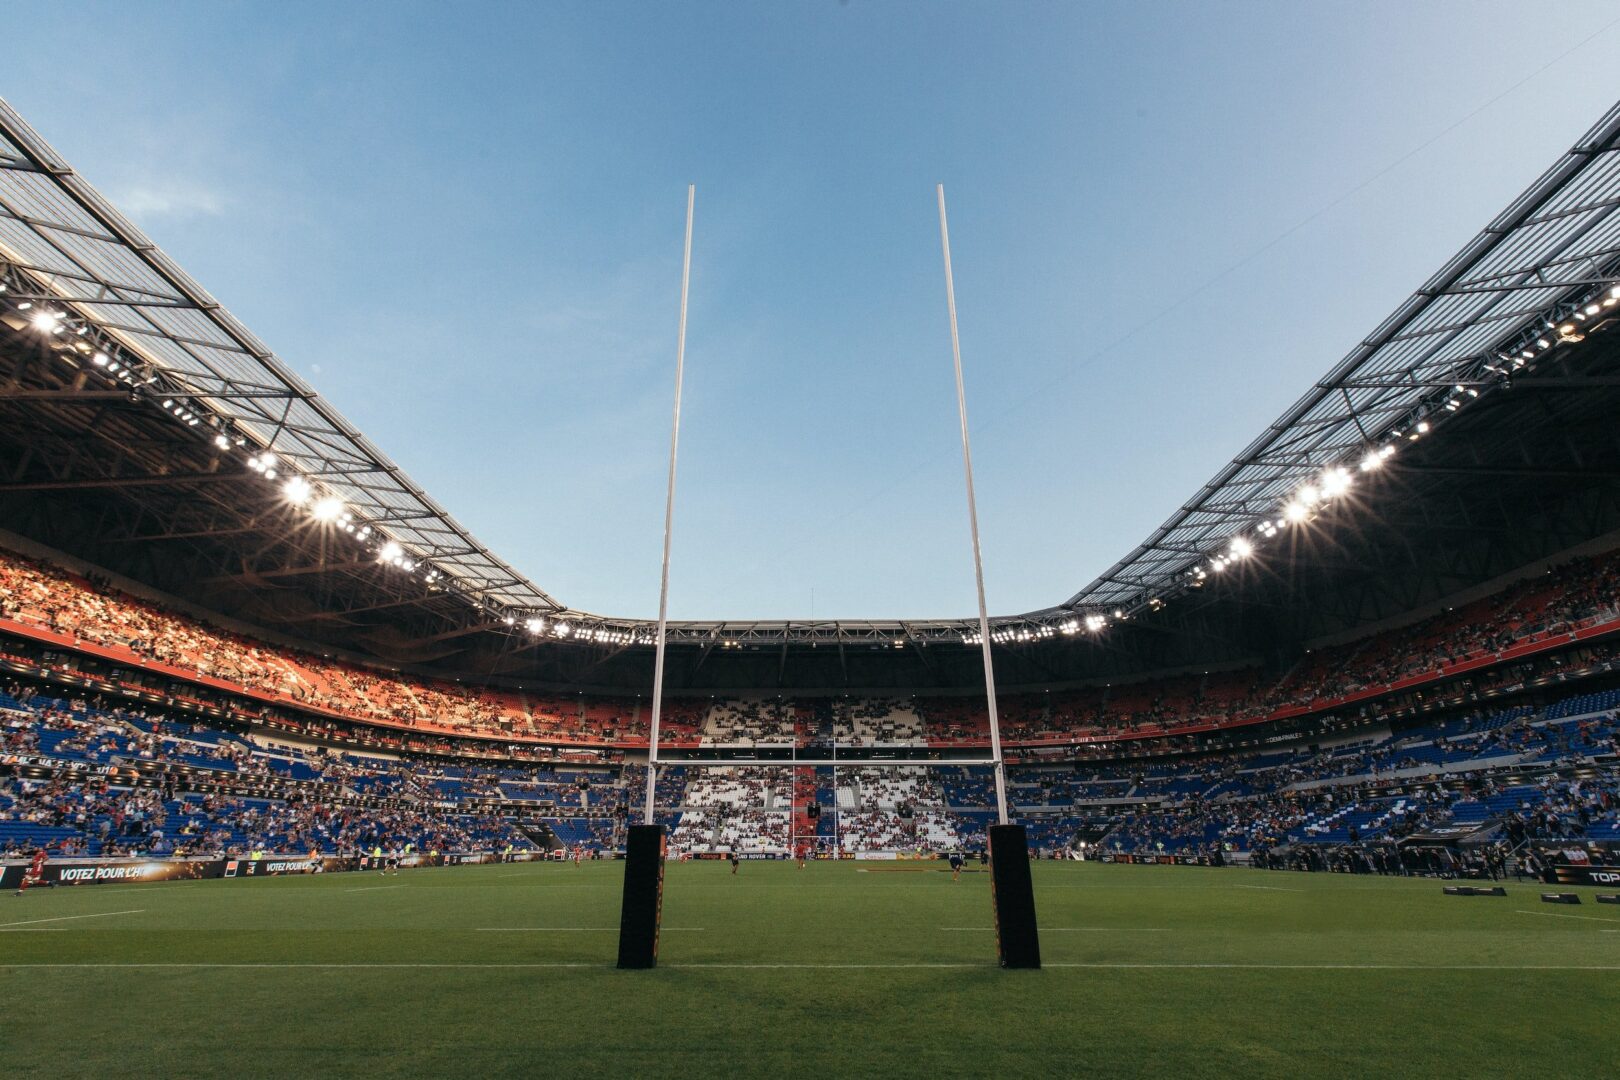 The inside of a rugby stadium.